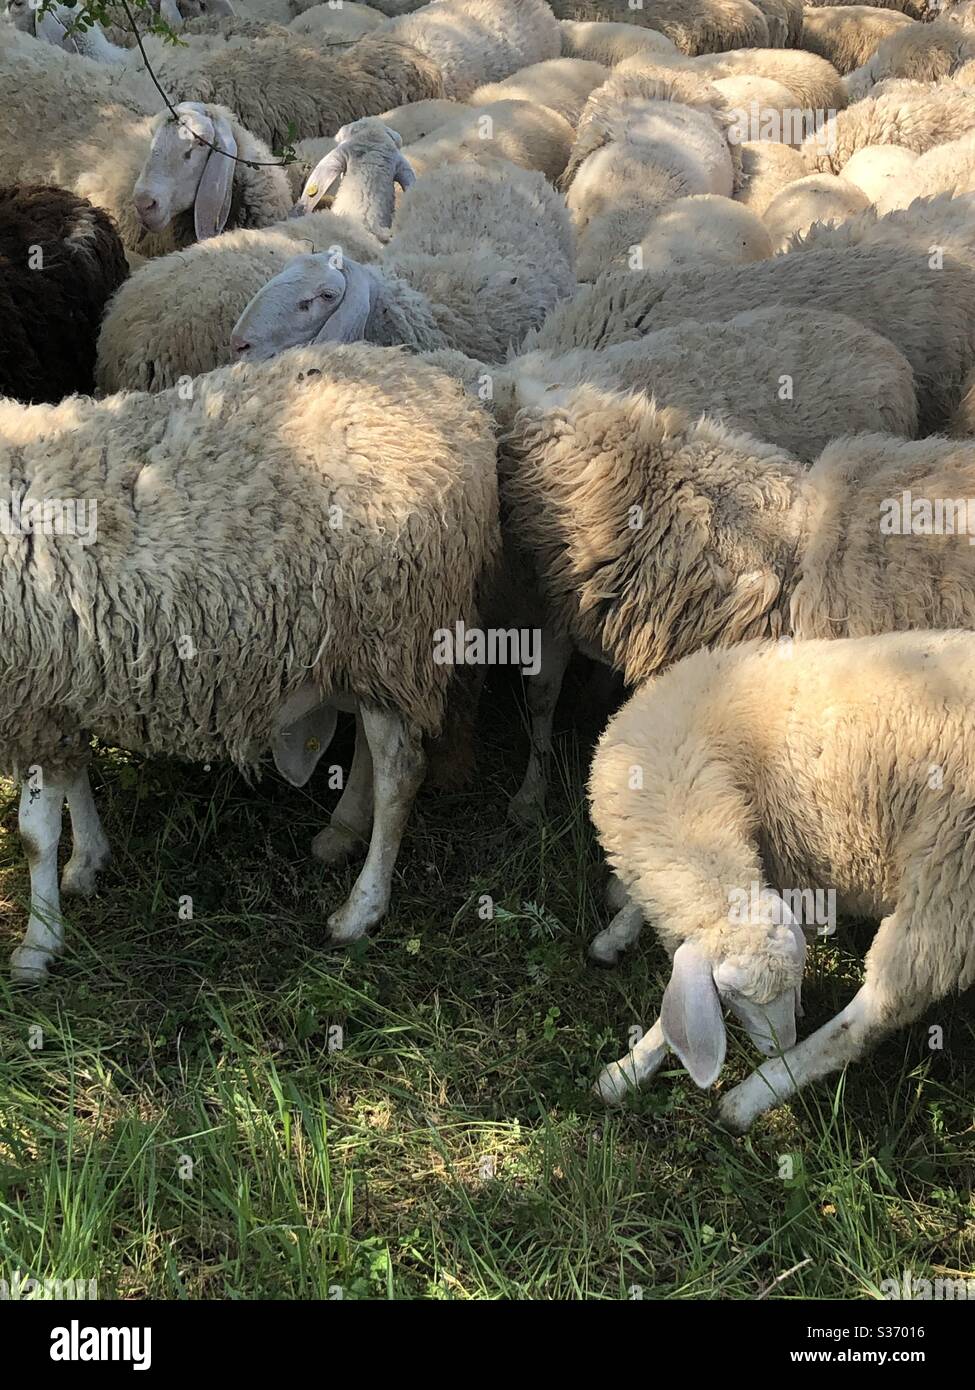 Crowd of sheep amidst wild nature in a meadow. Stock Photo